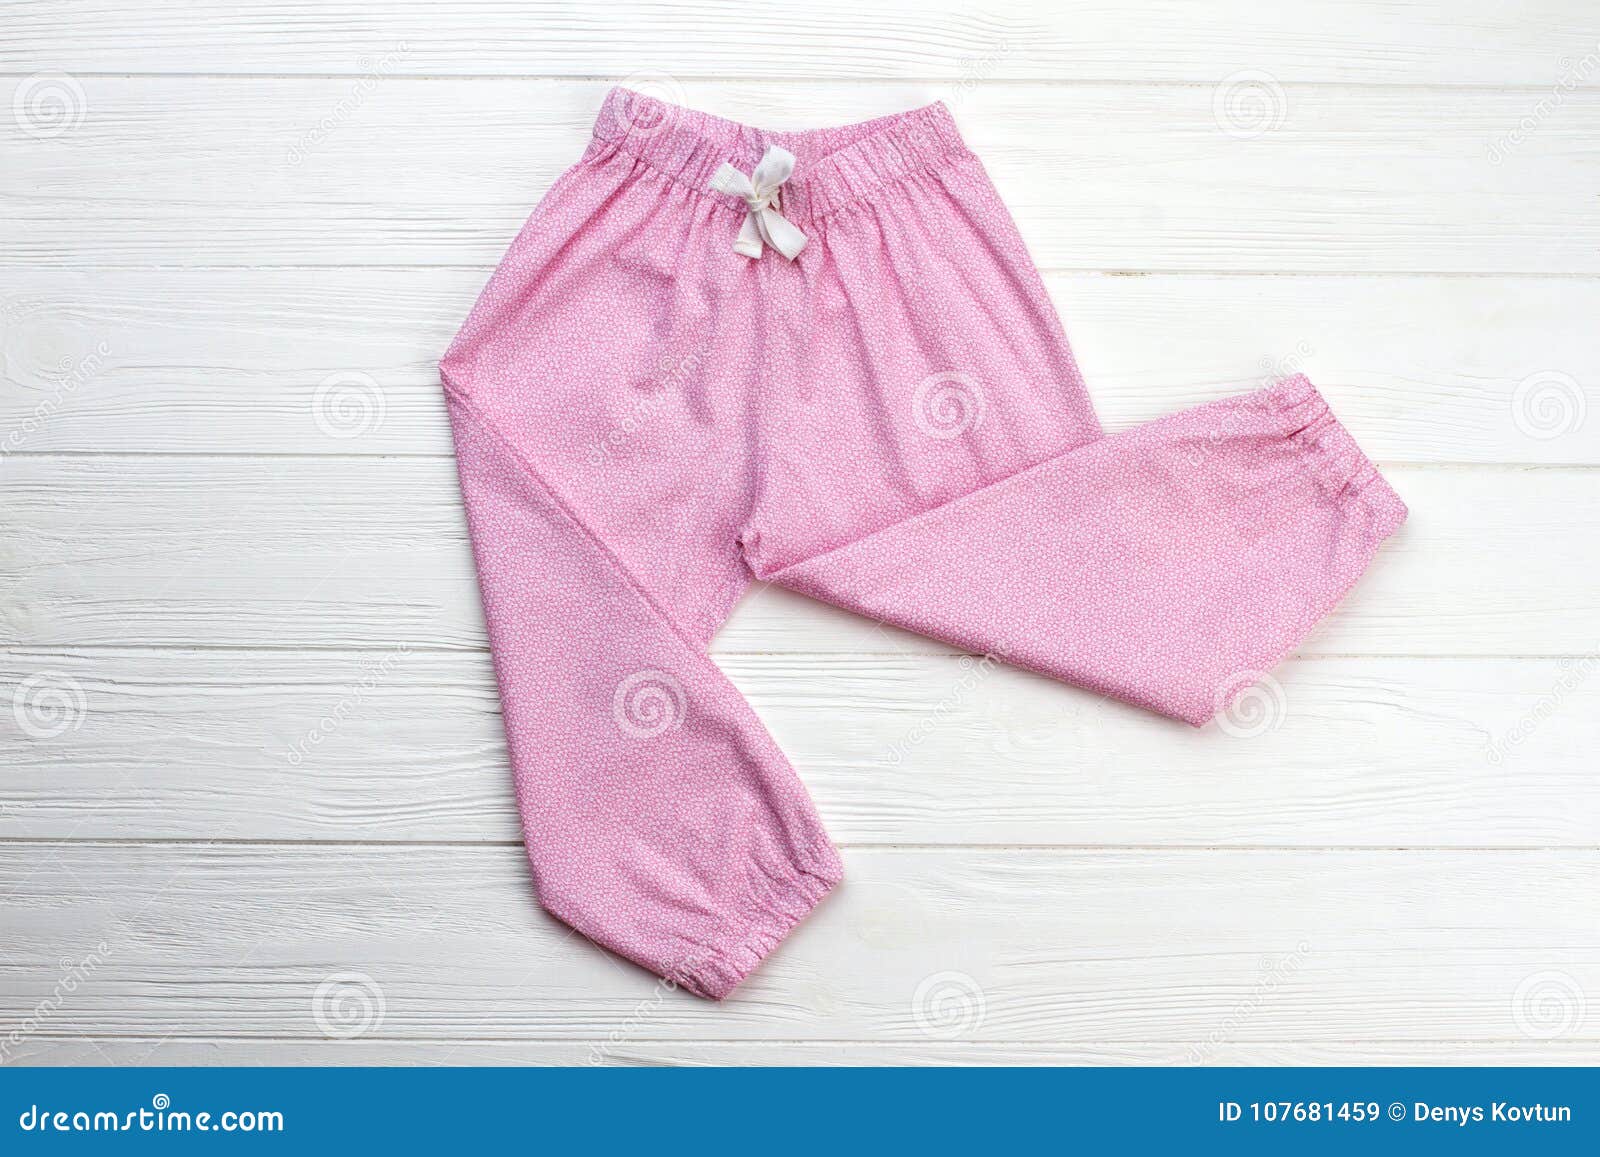 These Pants For Little Girls Are Essential For Their Everyday Looks